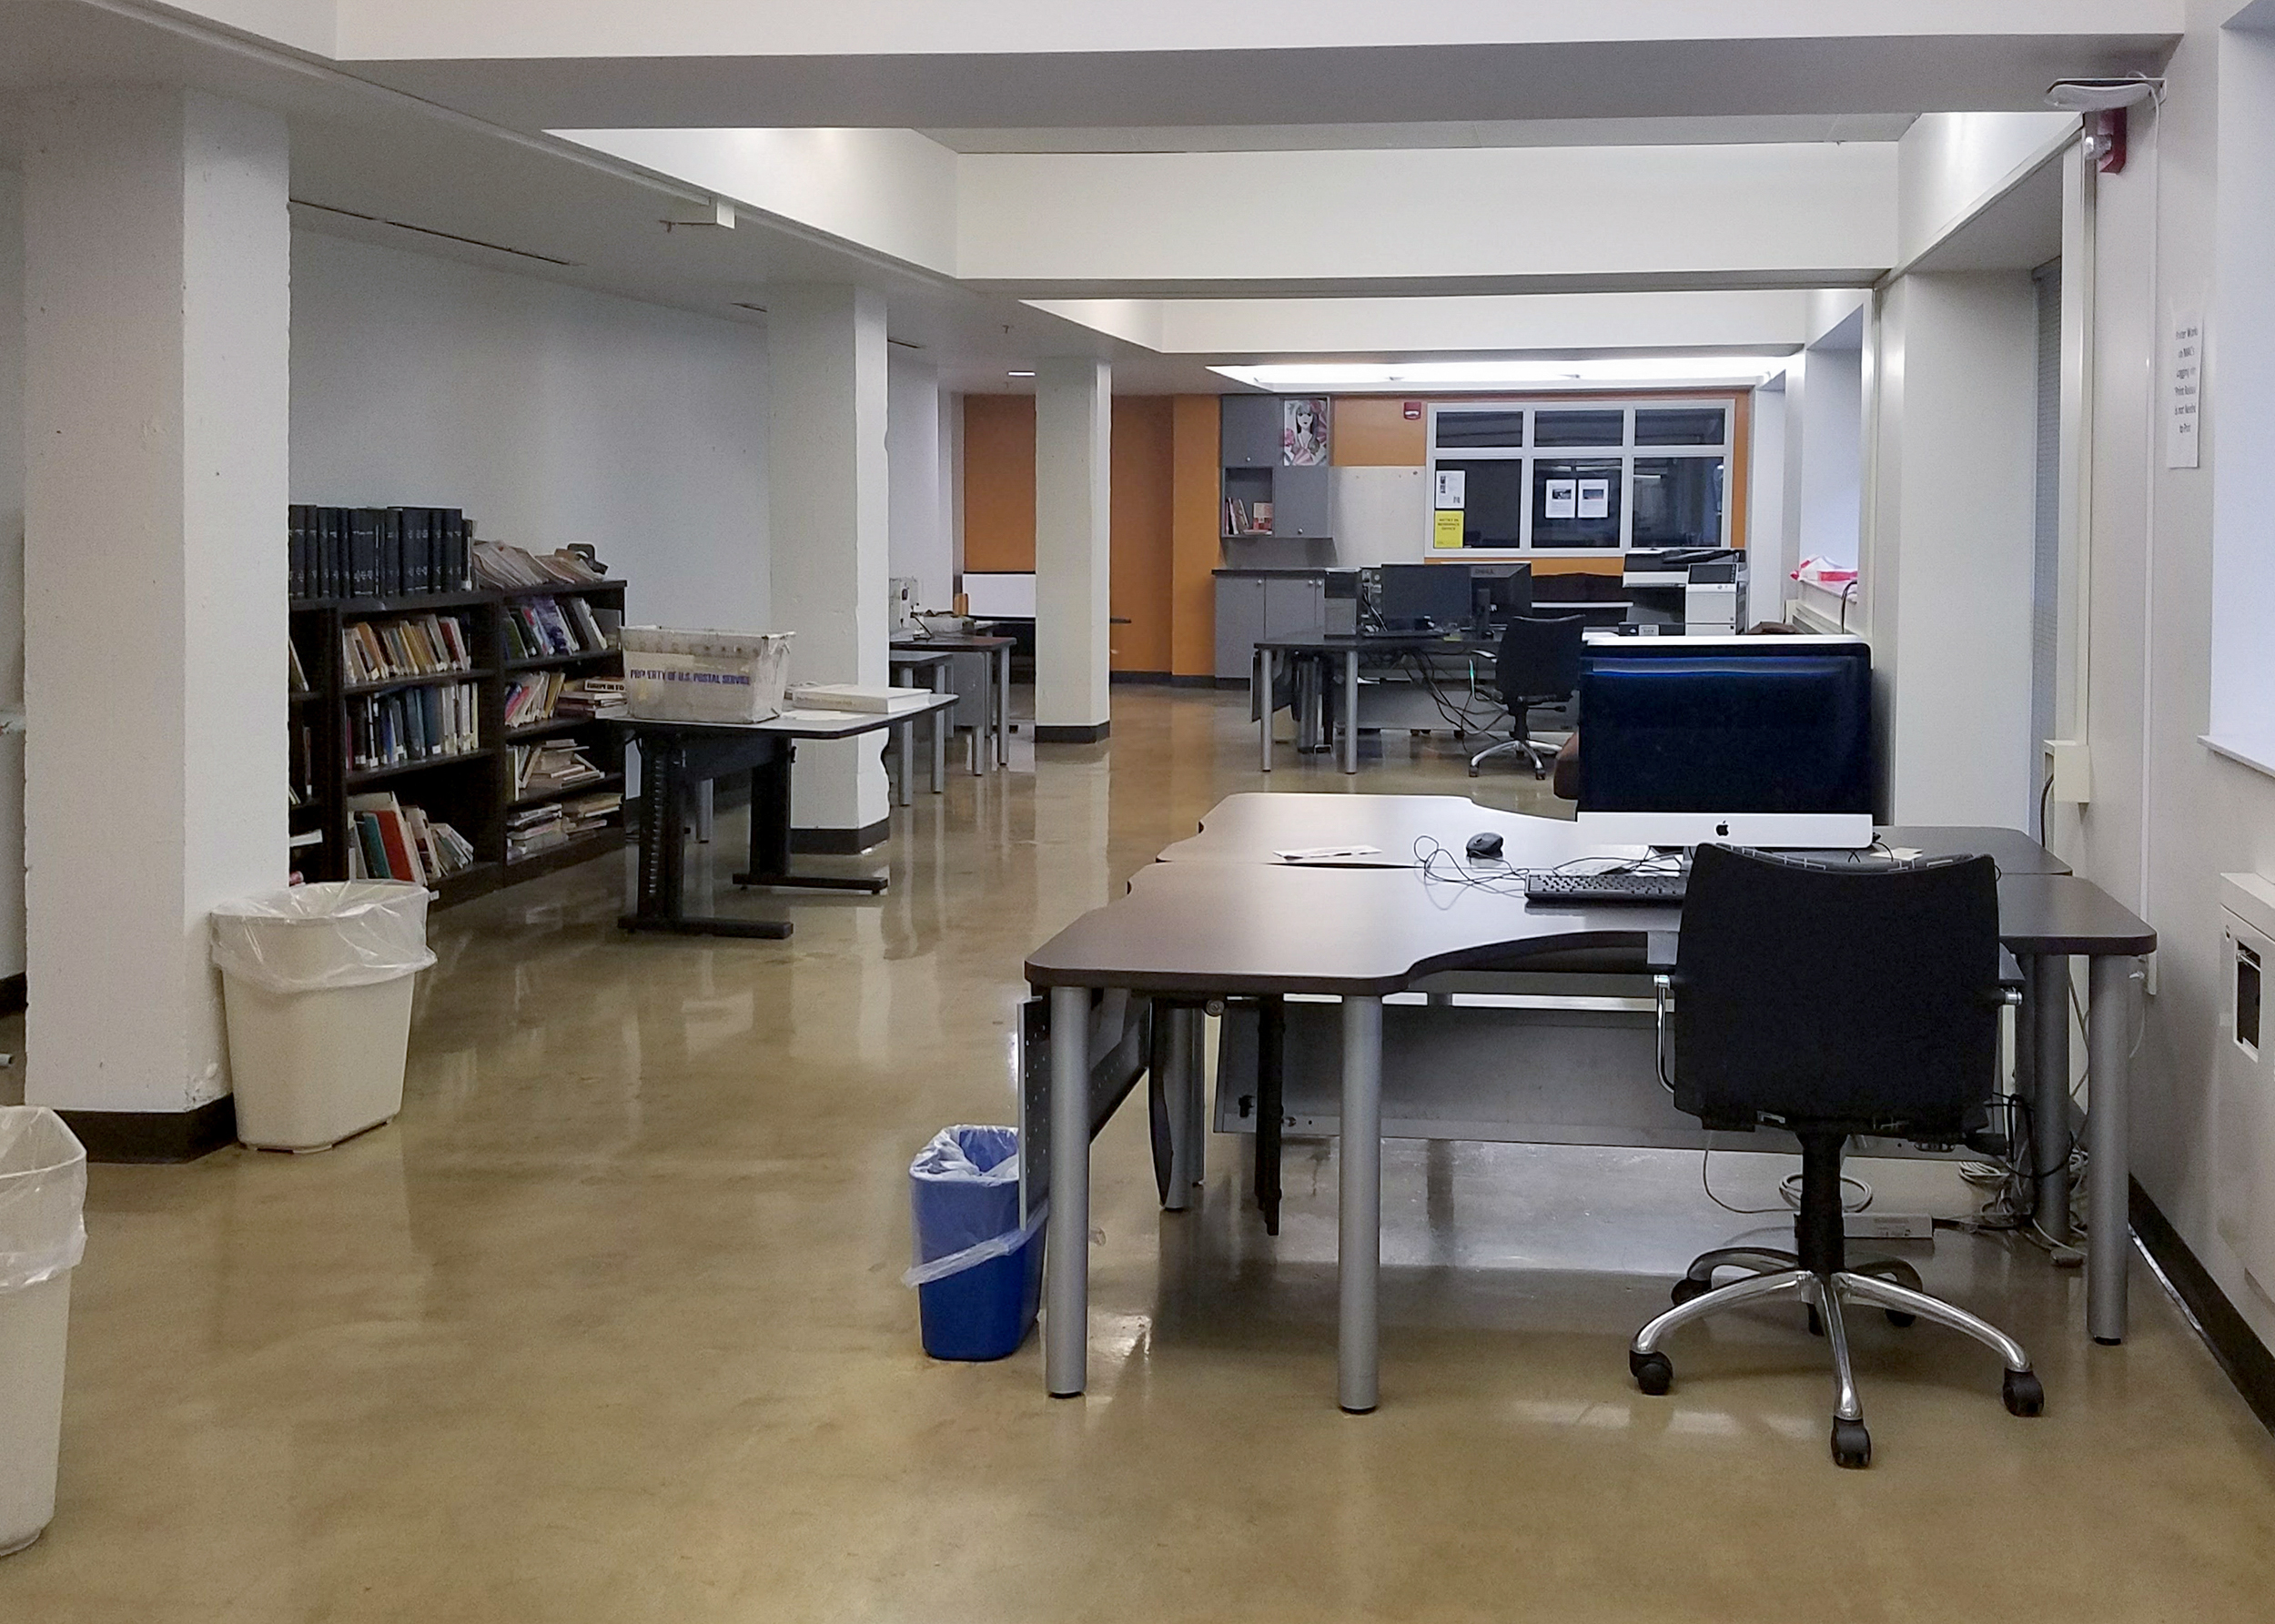 Academic Resource Center in Hashinger Hall, with computers on several desks and bookshelves along the wall.